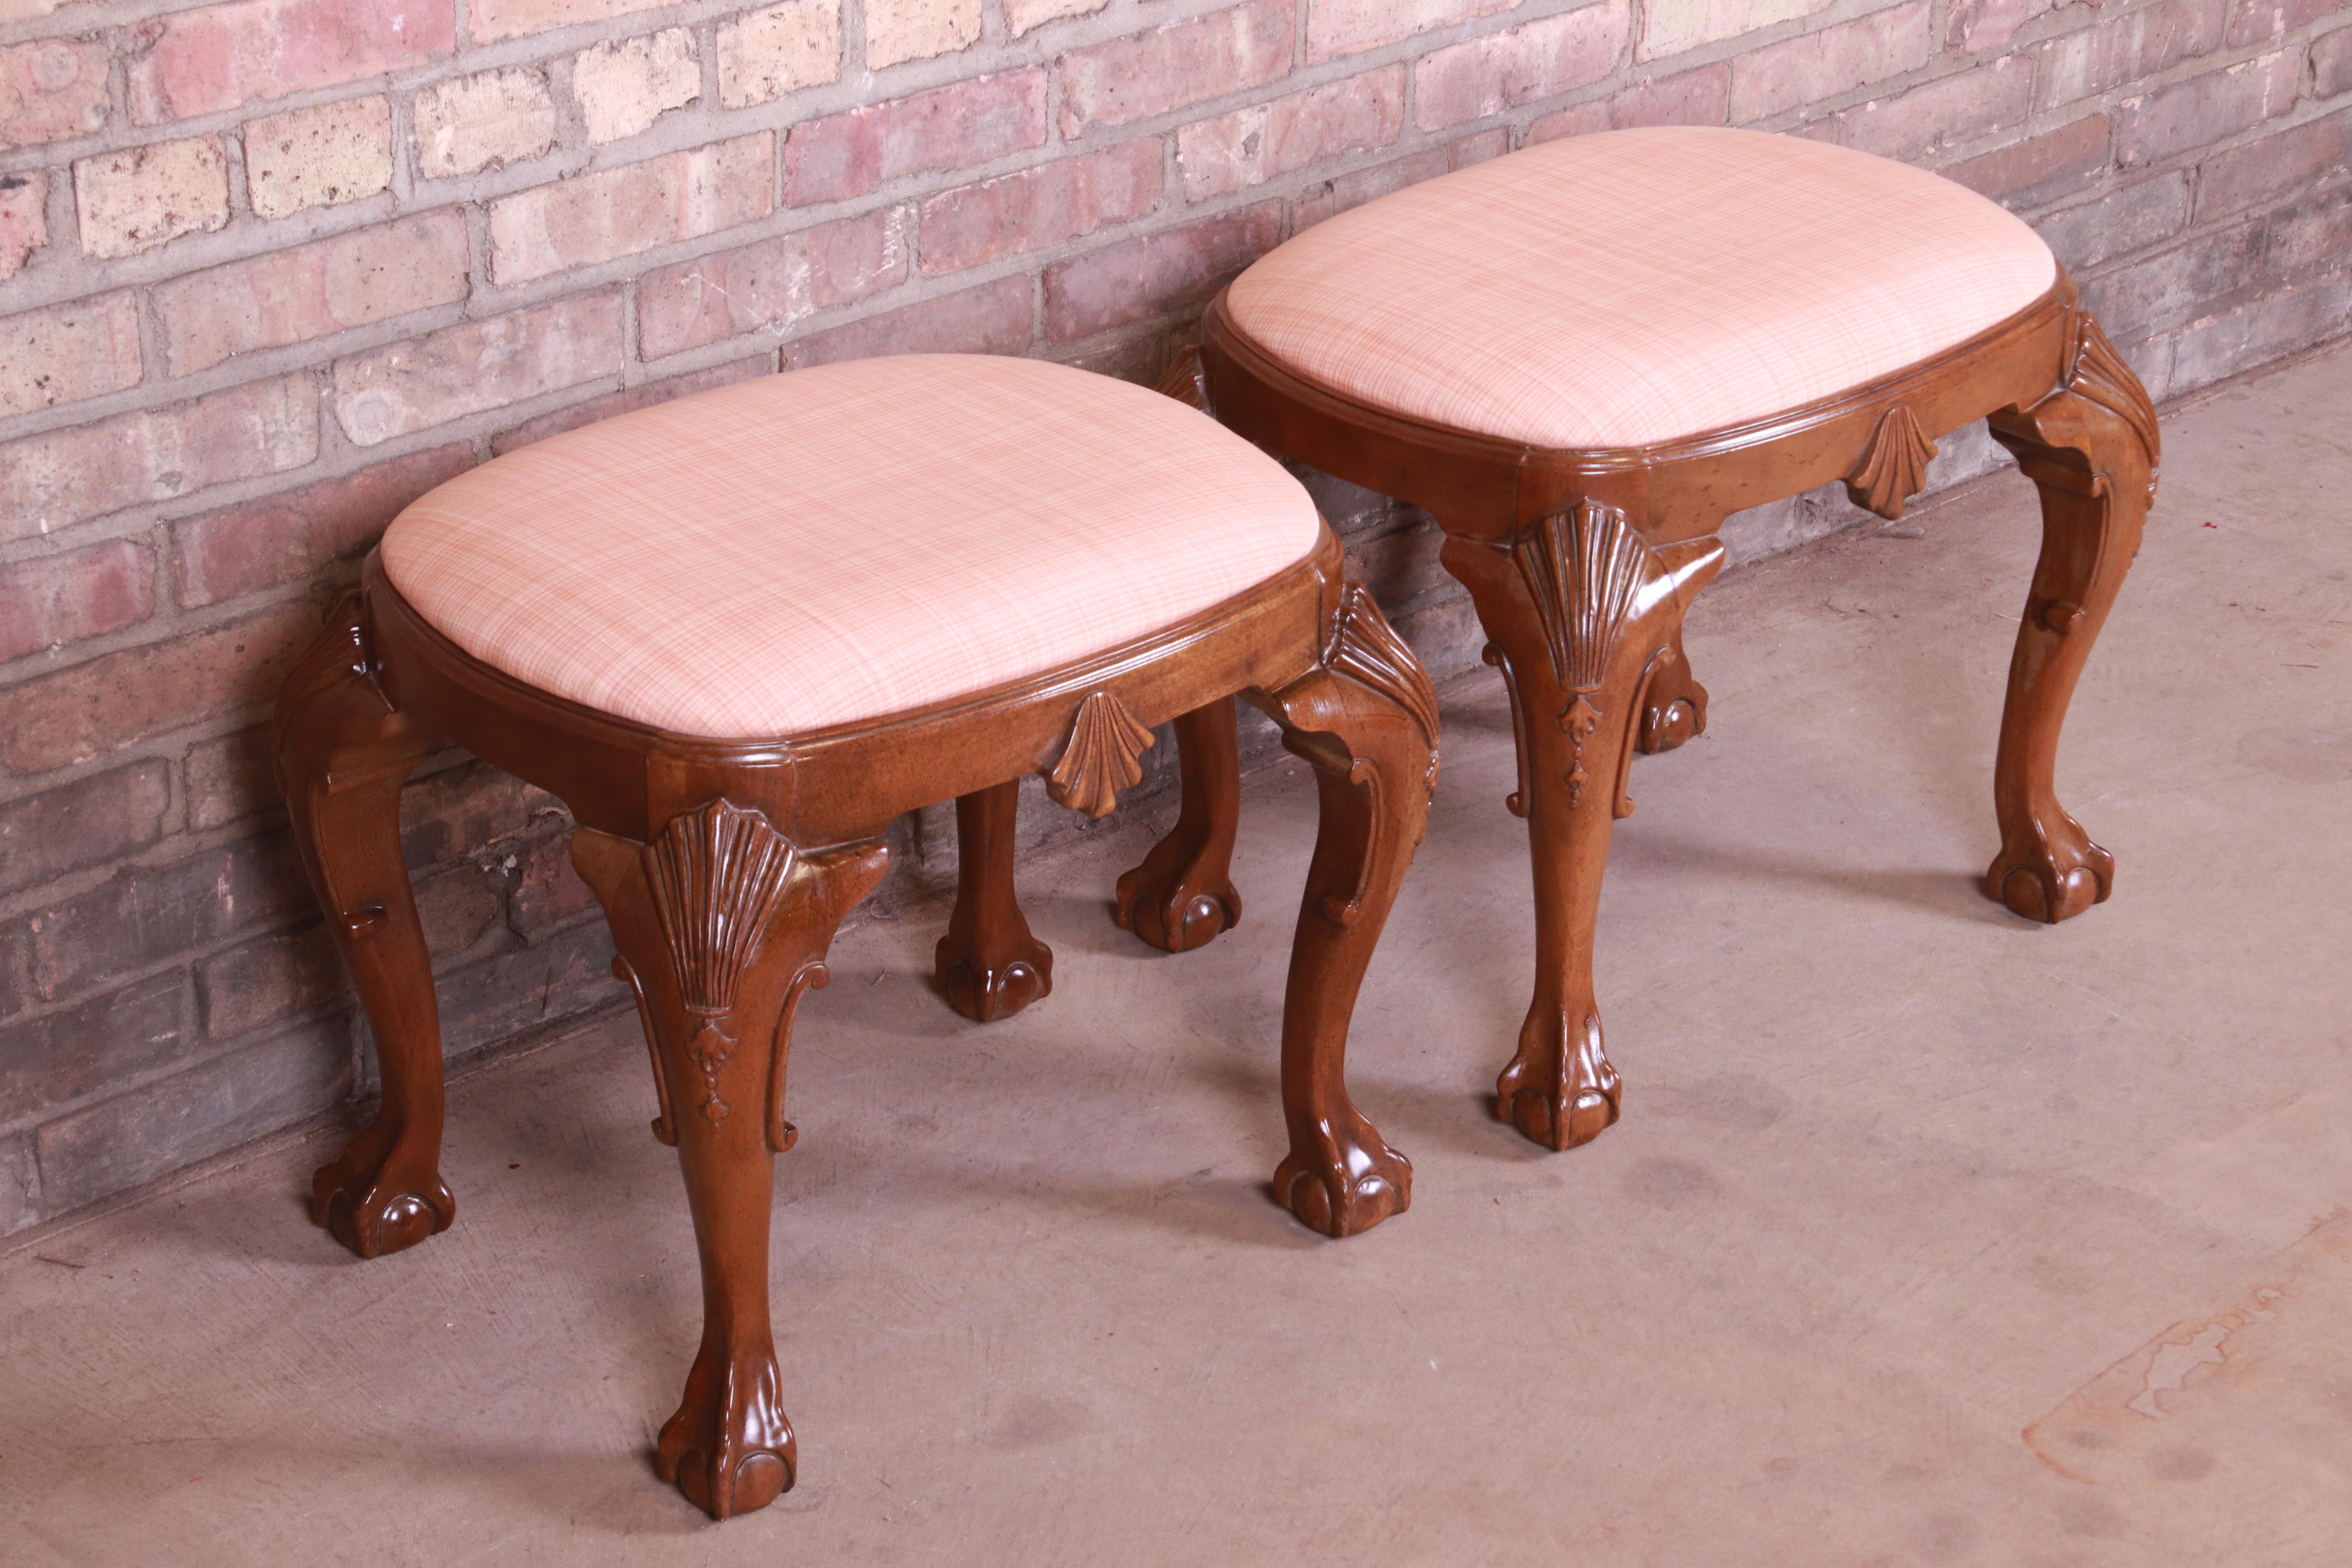 A gorgeous pair of Chippendale style ottomans or stools

By Baker Furniture 